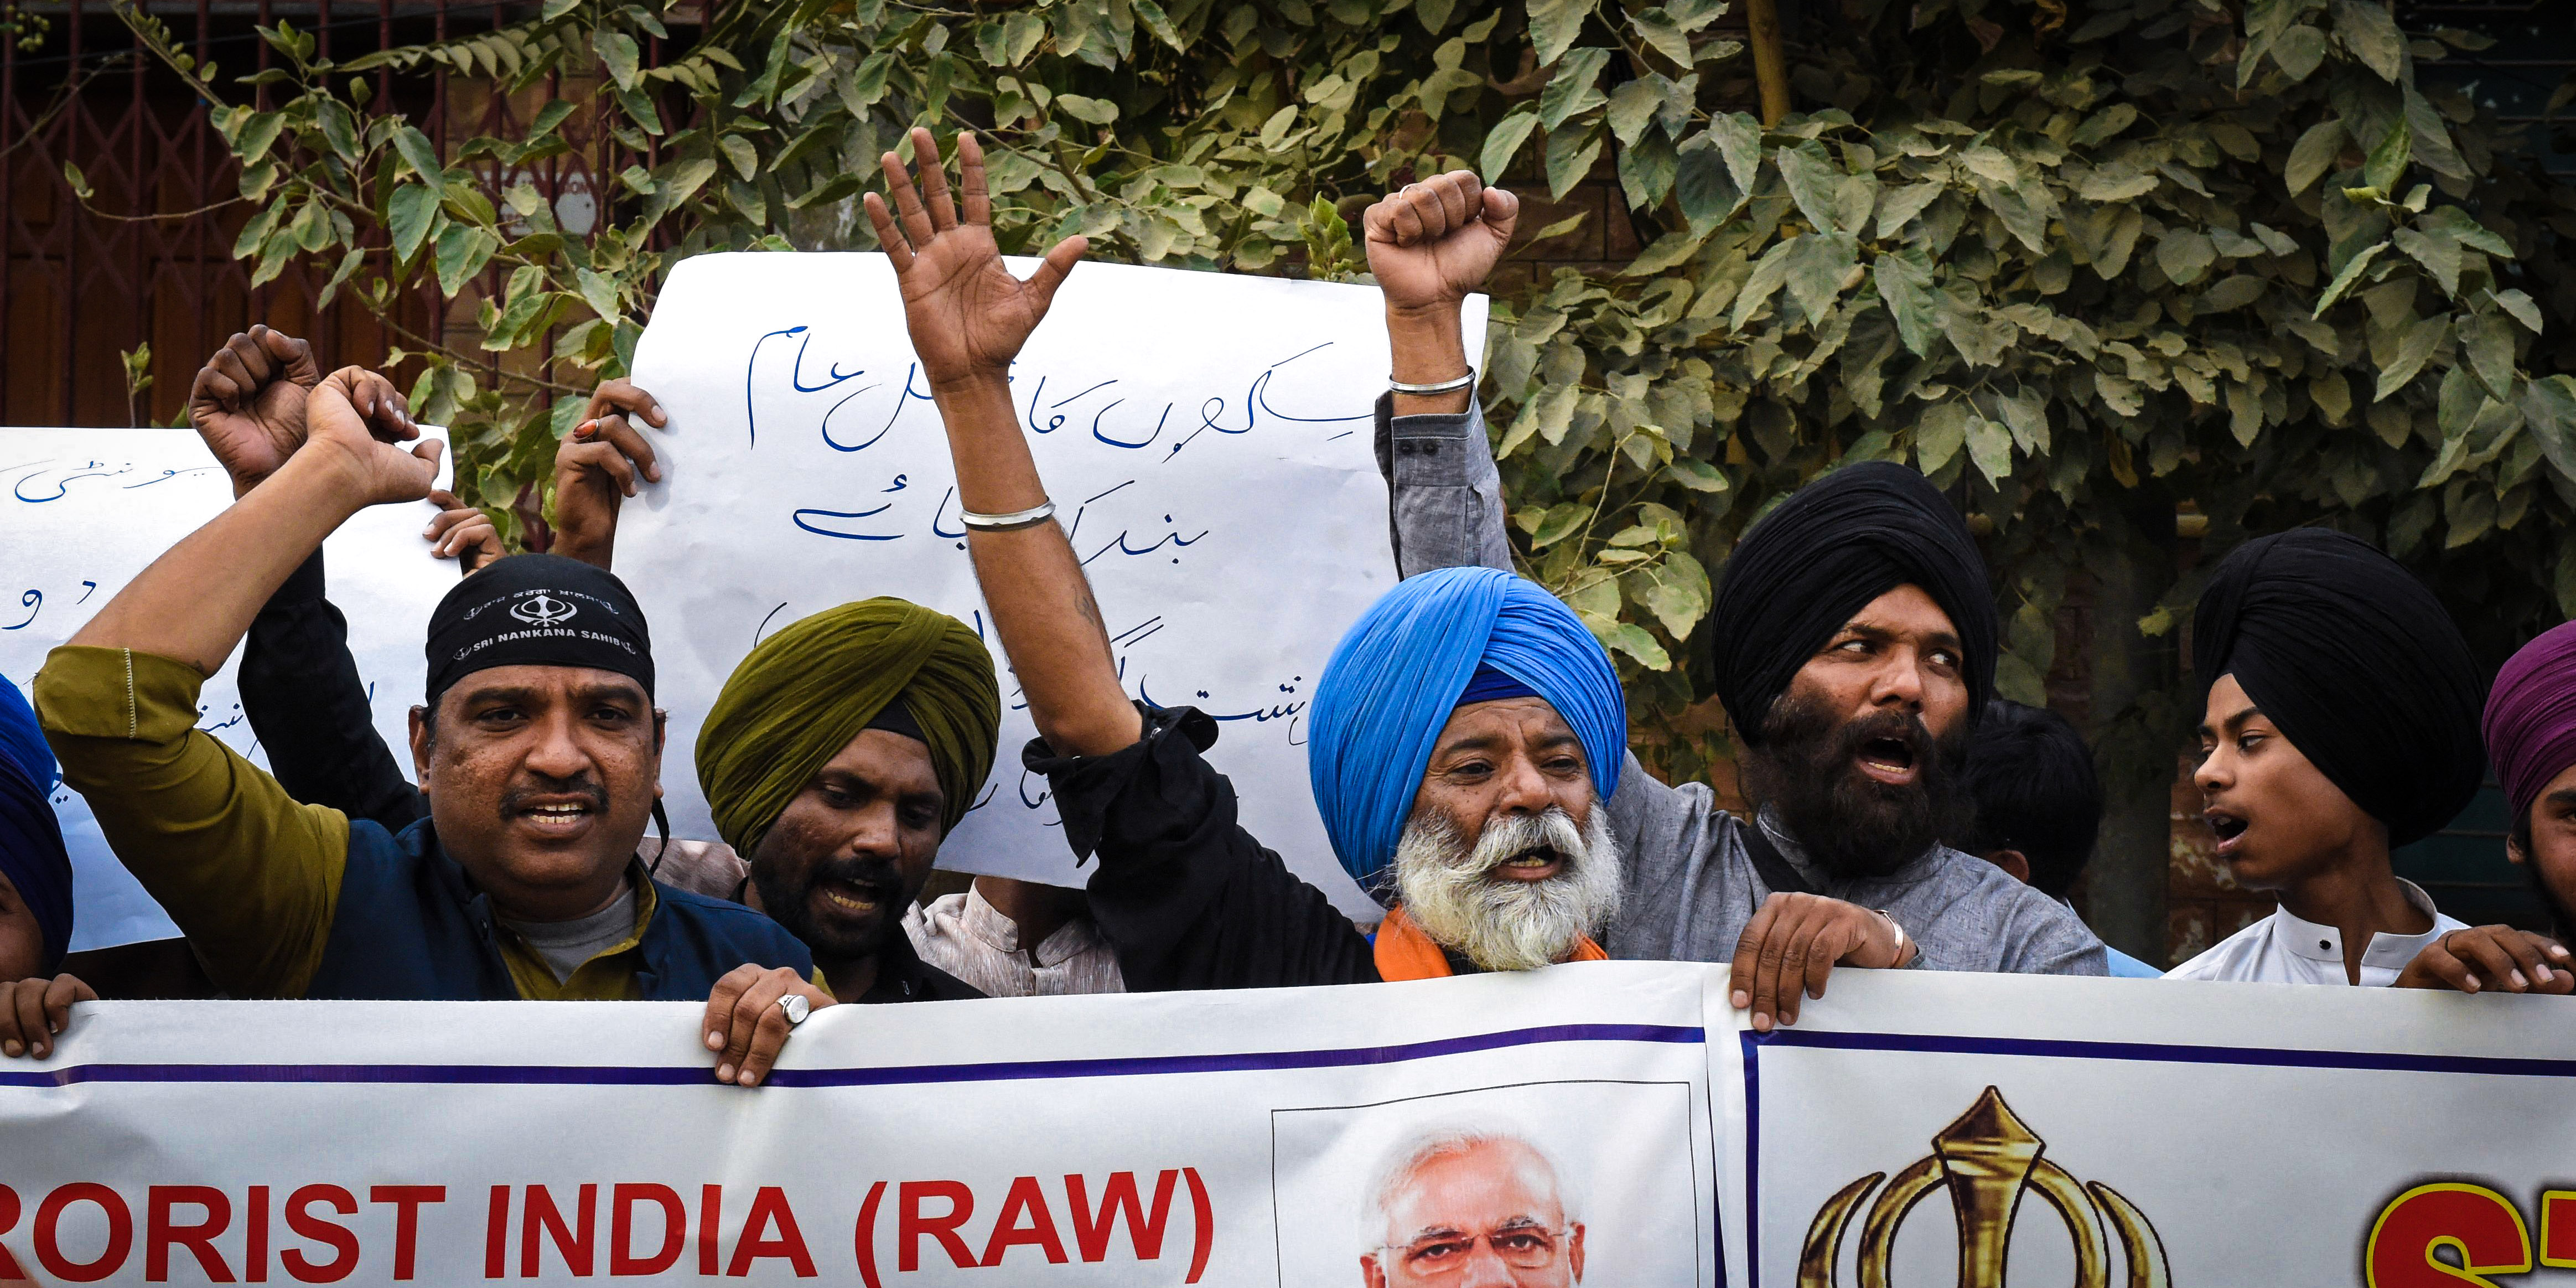 Members of Pakistan's Sikh community shout slogans as they hold banners during a protest in Quetta on September 23, 2023, to condemn the killing of a Sikh separatist Hardeep Singh Nijjar in Canada. India's historic adversary Pakistan said on September 21, that Western nations had failed to see the reality of New Delhi's right-wing leadership after Canada alleged Indian involvement in a killing. Canada expelled an Indian diplomat, prompting a tit-for-tat reaction, after concluding that Indian agents played a role in the June killing near Vancouver of a Sikh separatist, Hardeep Singh Nijjar. (Photo by Banaras KHAN / AFP) (Photo by BANARAS KHAN/AFP via Getty Images)'s Sikh community shout slogans as they hold banners during a protest in Quetta on September 23, 2023, to condemn the killing of a Sikh separatist Hardeep Singh Nijjar in Canada. India's historic adversary Pakistan said on September 21, that Western nations had failed to see the reality of New Delhi's right-wing leadership after Canada alleged Indian involvement in a killing. Canada expelled an Indian diplomat, prompting a tit-for-tat reaction, after concluding that Indian agents played a role in the June killing near Vancouver of a Sikh separatist, Hardeep Singh Nijjar. (Photo by Banaras KHAN / AFP) (Photo by BANARAS KHAN/AFP via Getty Images)